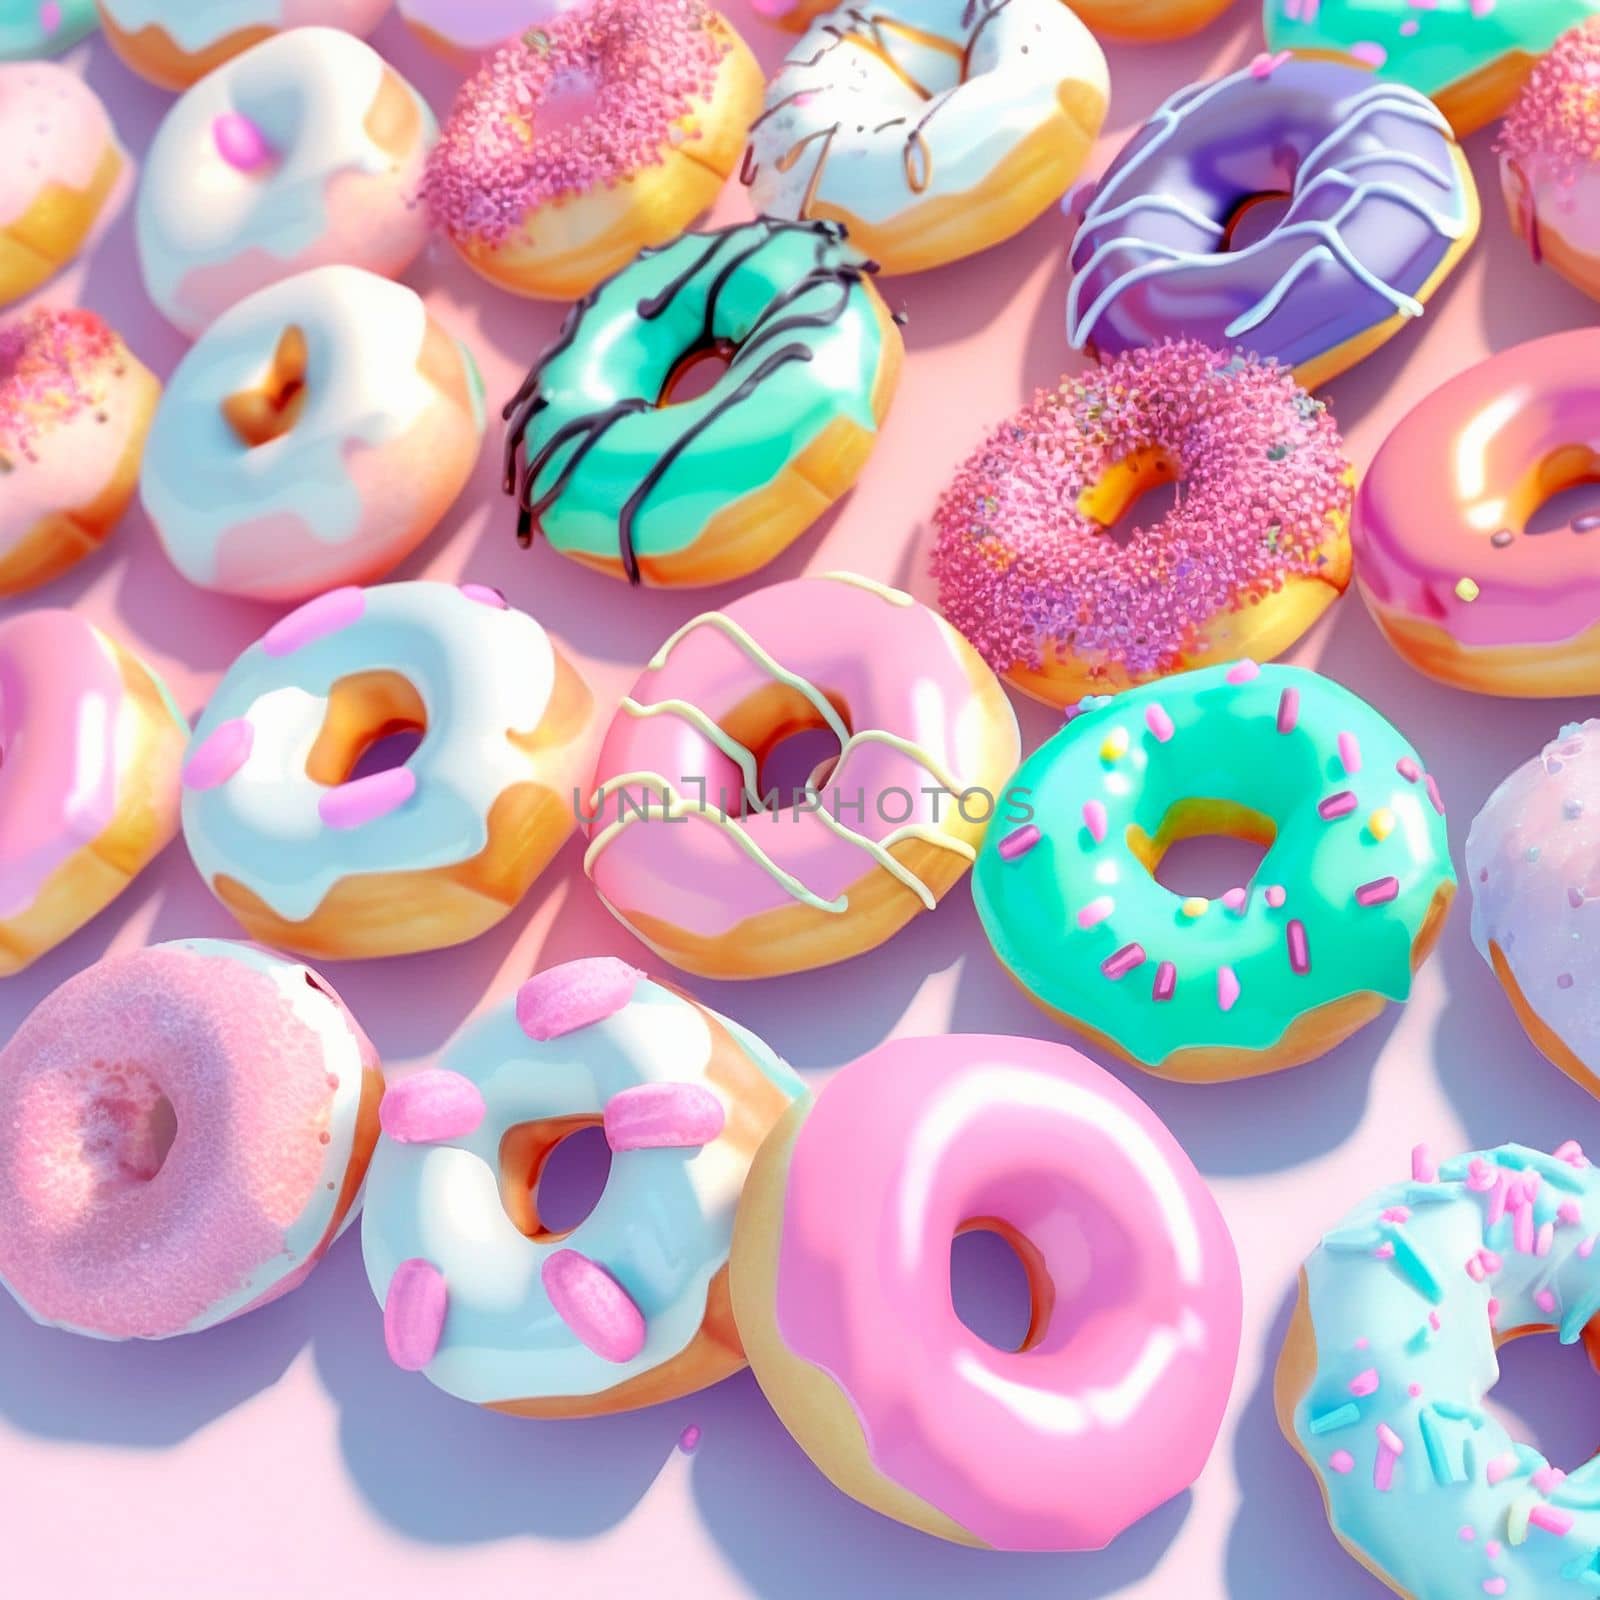 Background with donuts . High quality illustration